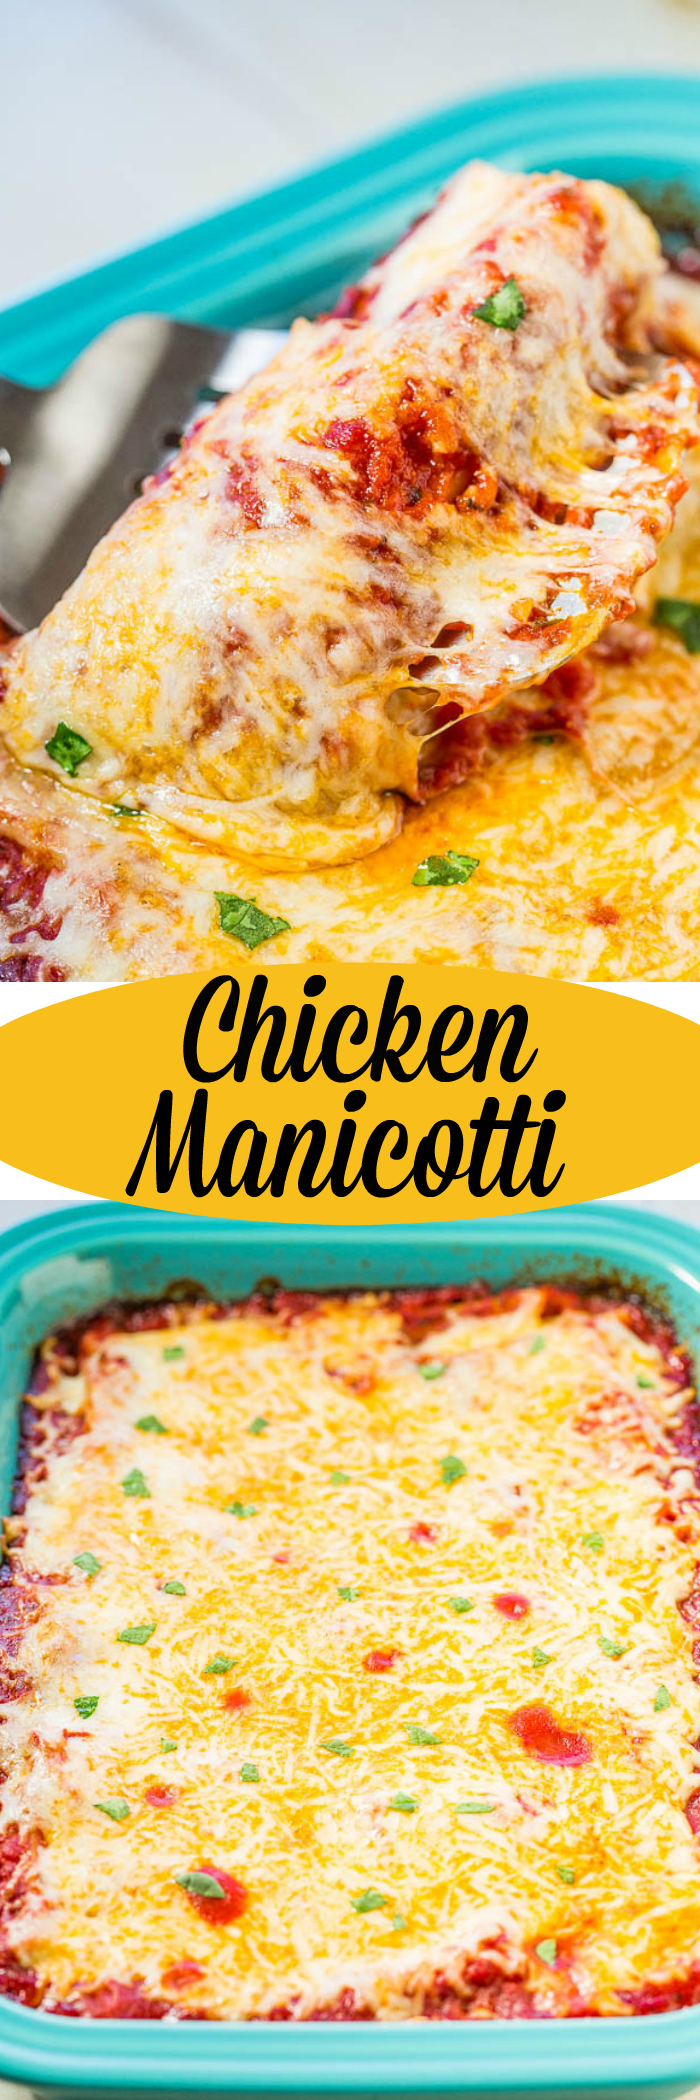 Easy Chicken Manicotti - Pasta shells stuffed with chicken, coated in red sauce, and smothered with loads of melted cheese!! Pure comfort food that's packed with flavor that the whole family will love!!